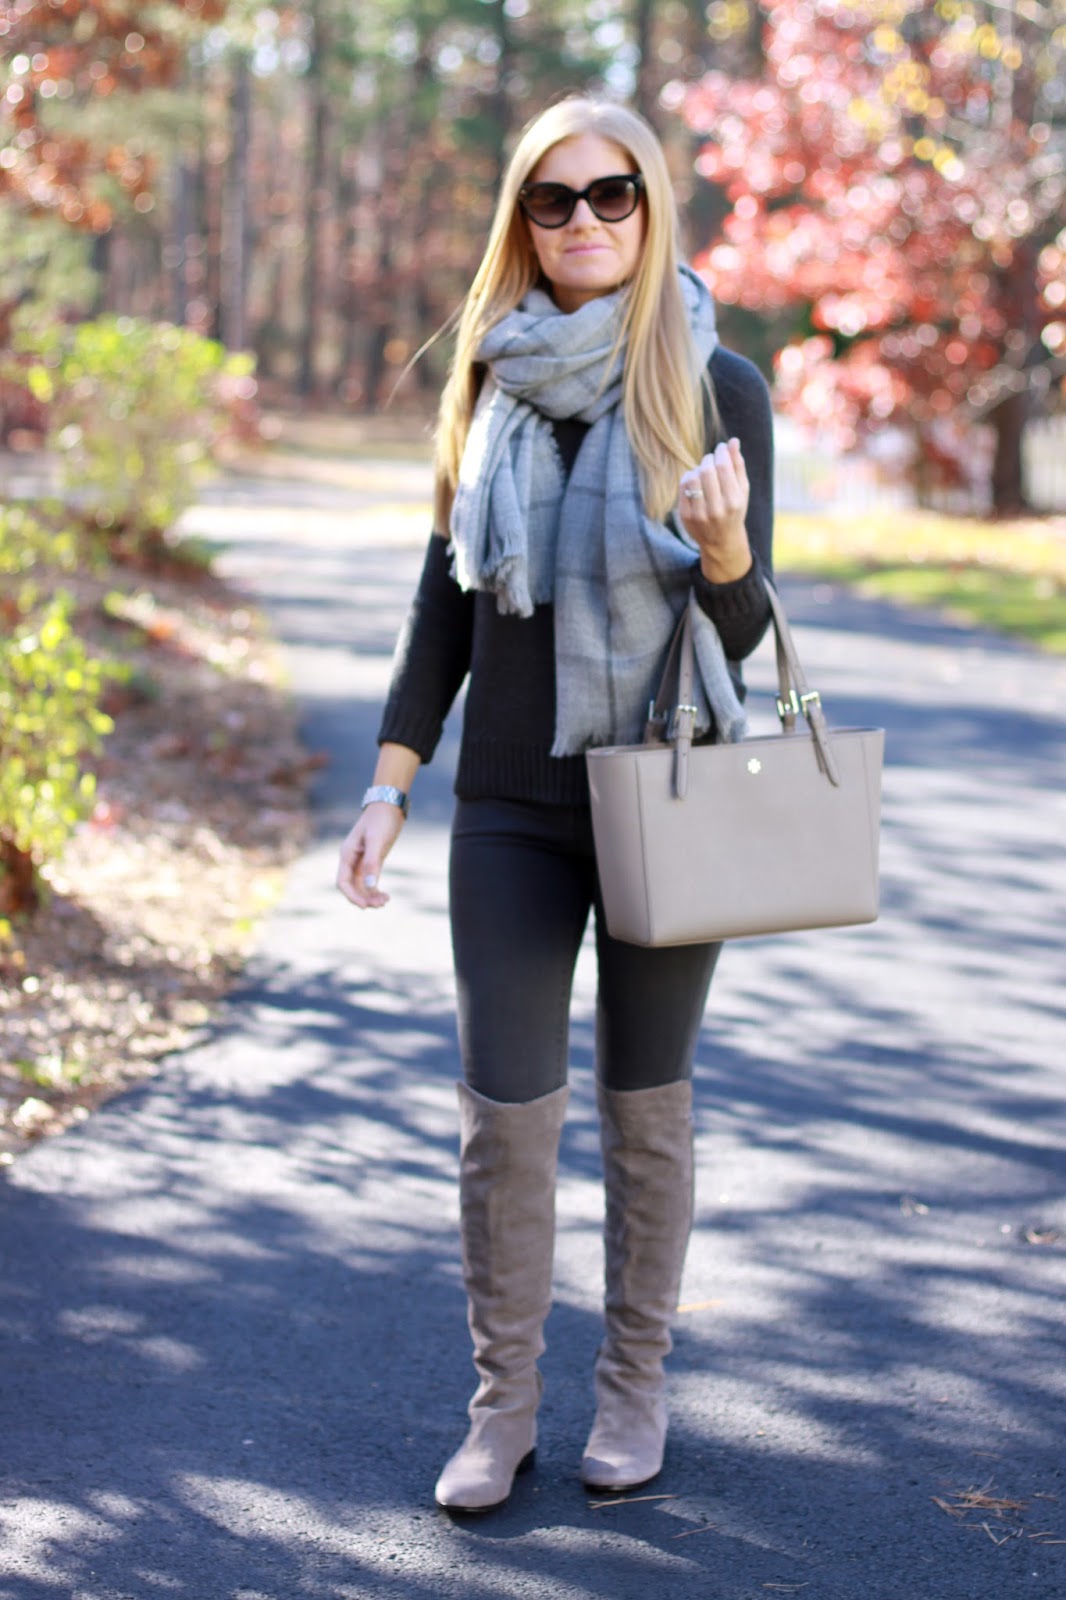 Shopping Bags and Travel Bags: 5 Shades of Gray